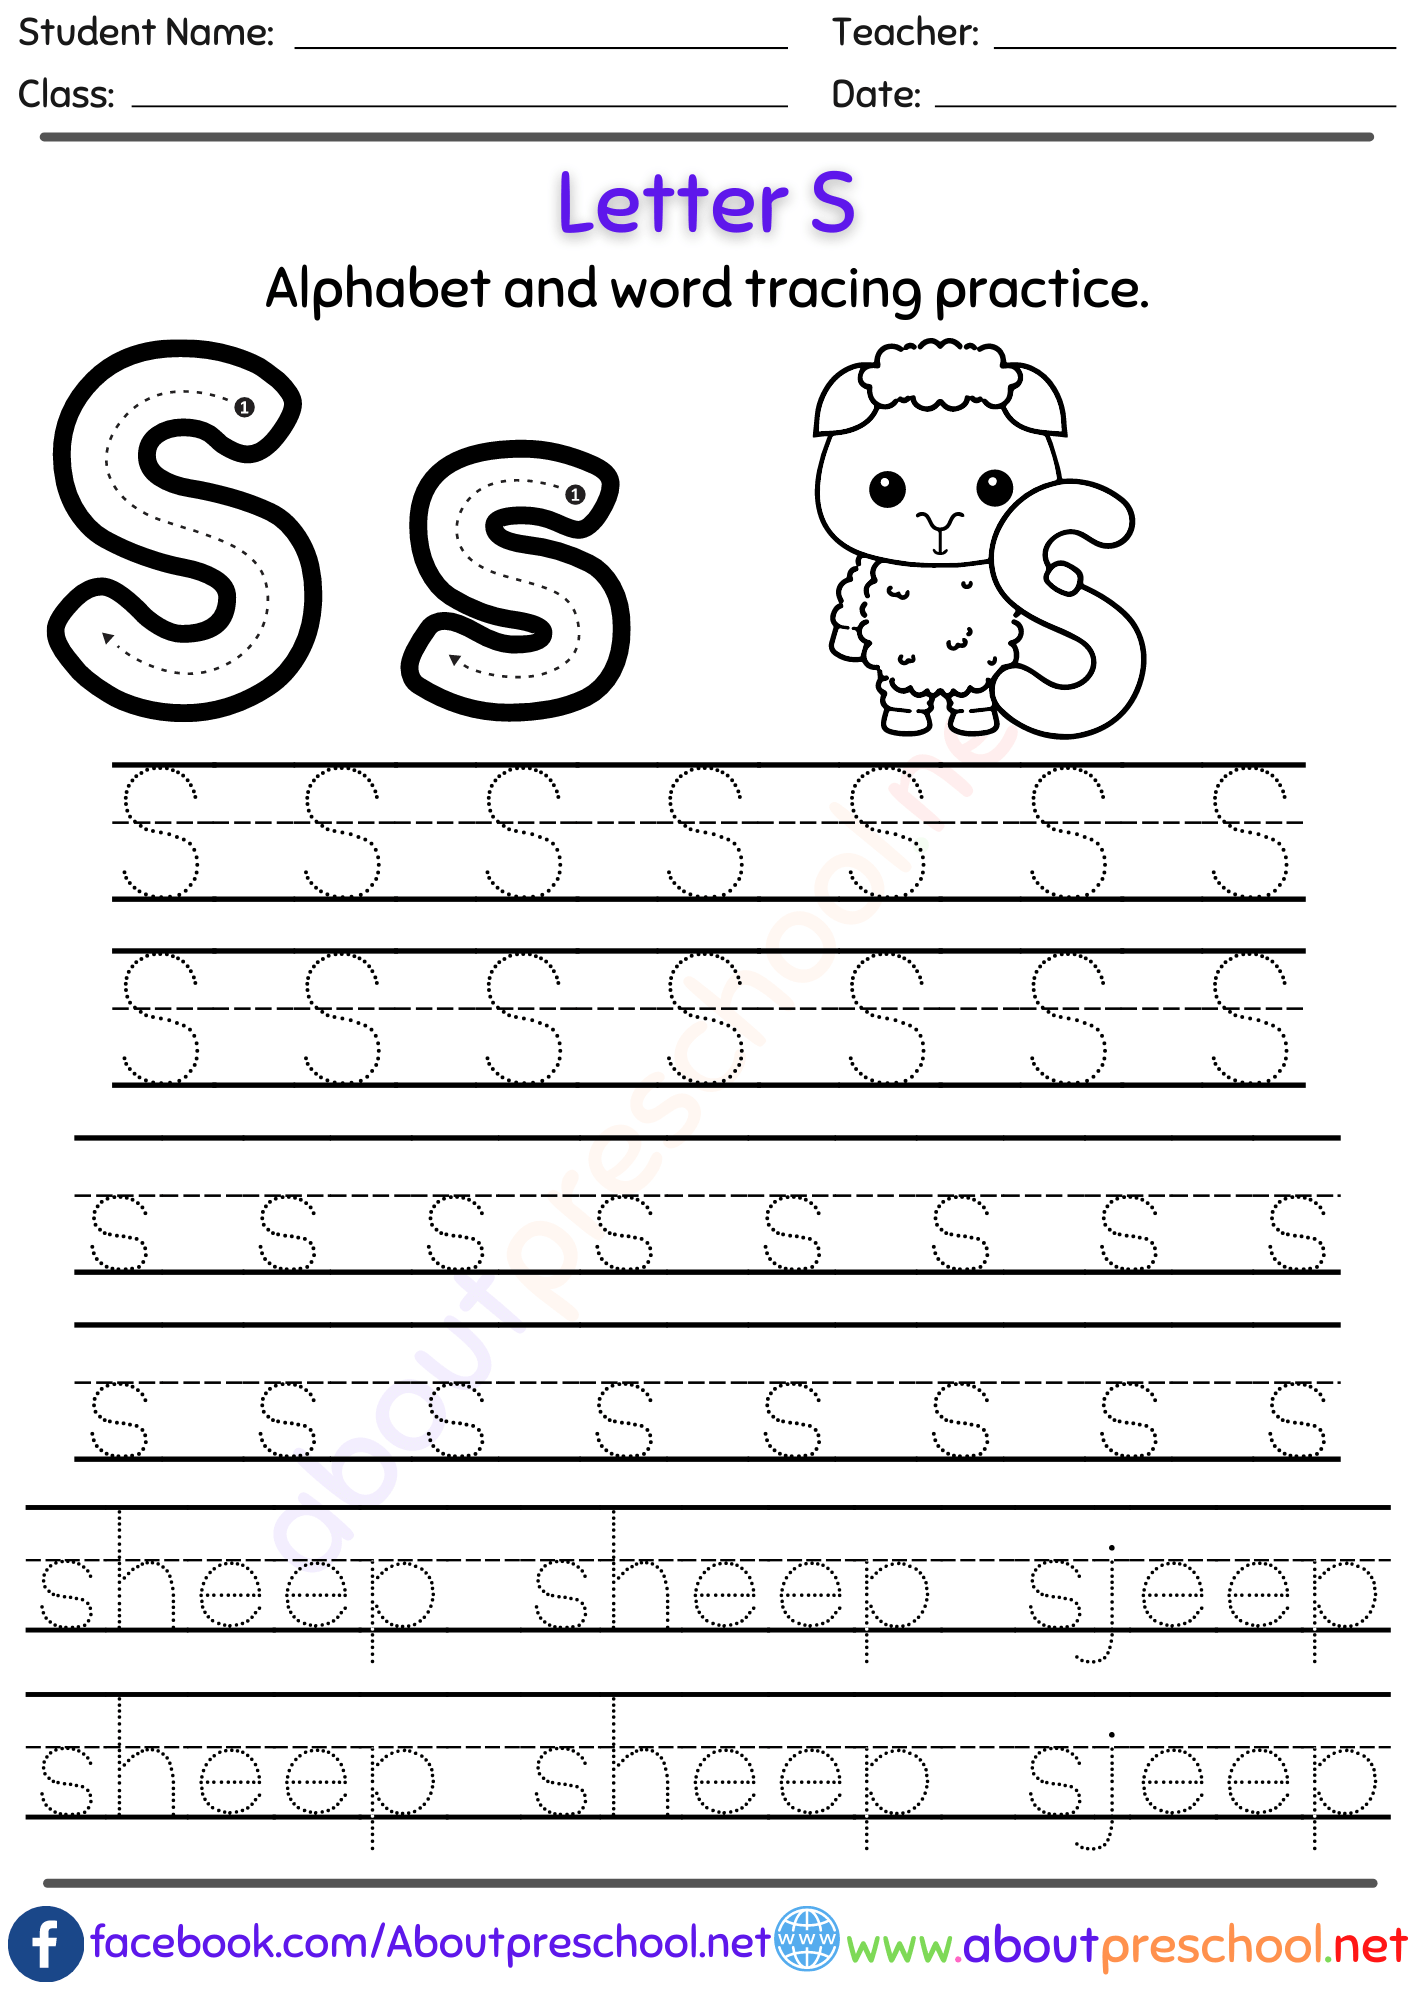 Free Letter S Alphabet tracing worksheets